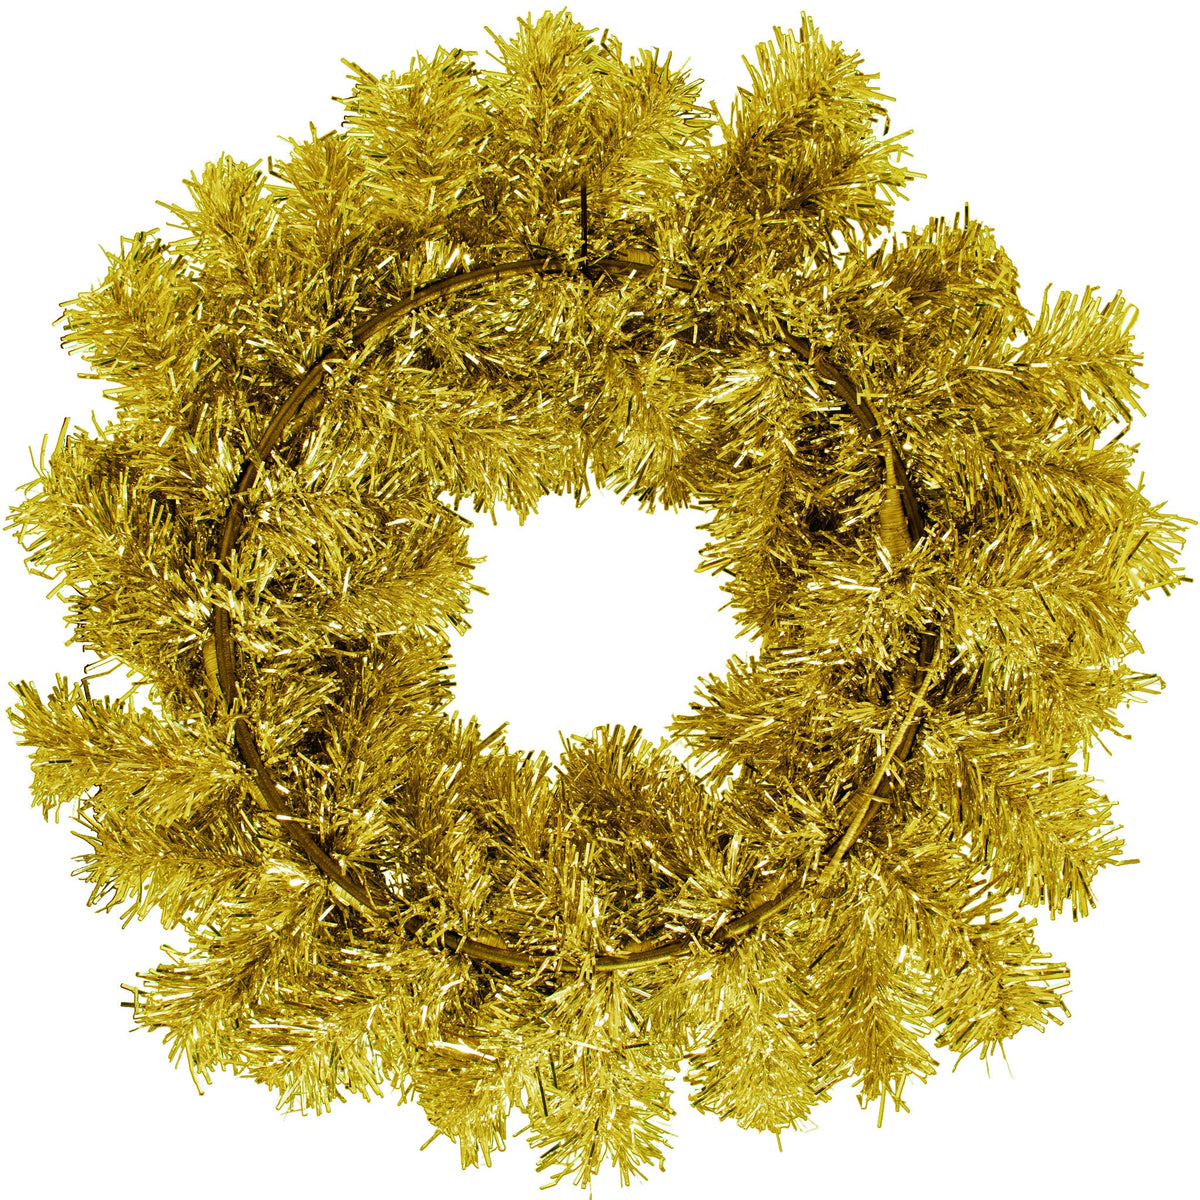 Introducing our 18in Gold Tinsel Christmas Wreaths - the perfect addition to your holiday décor!